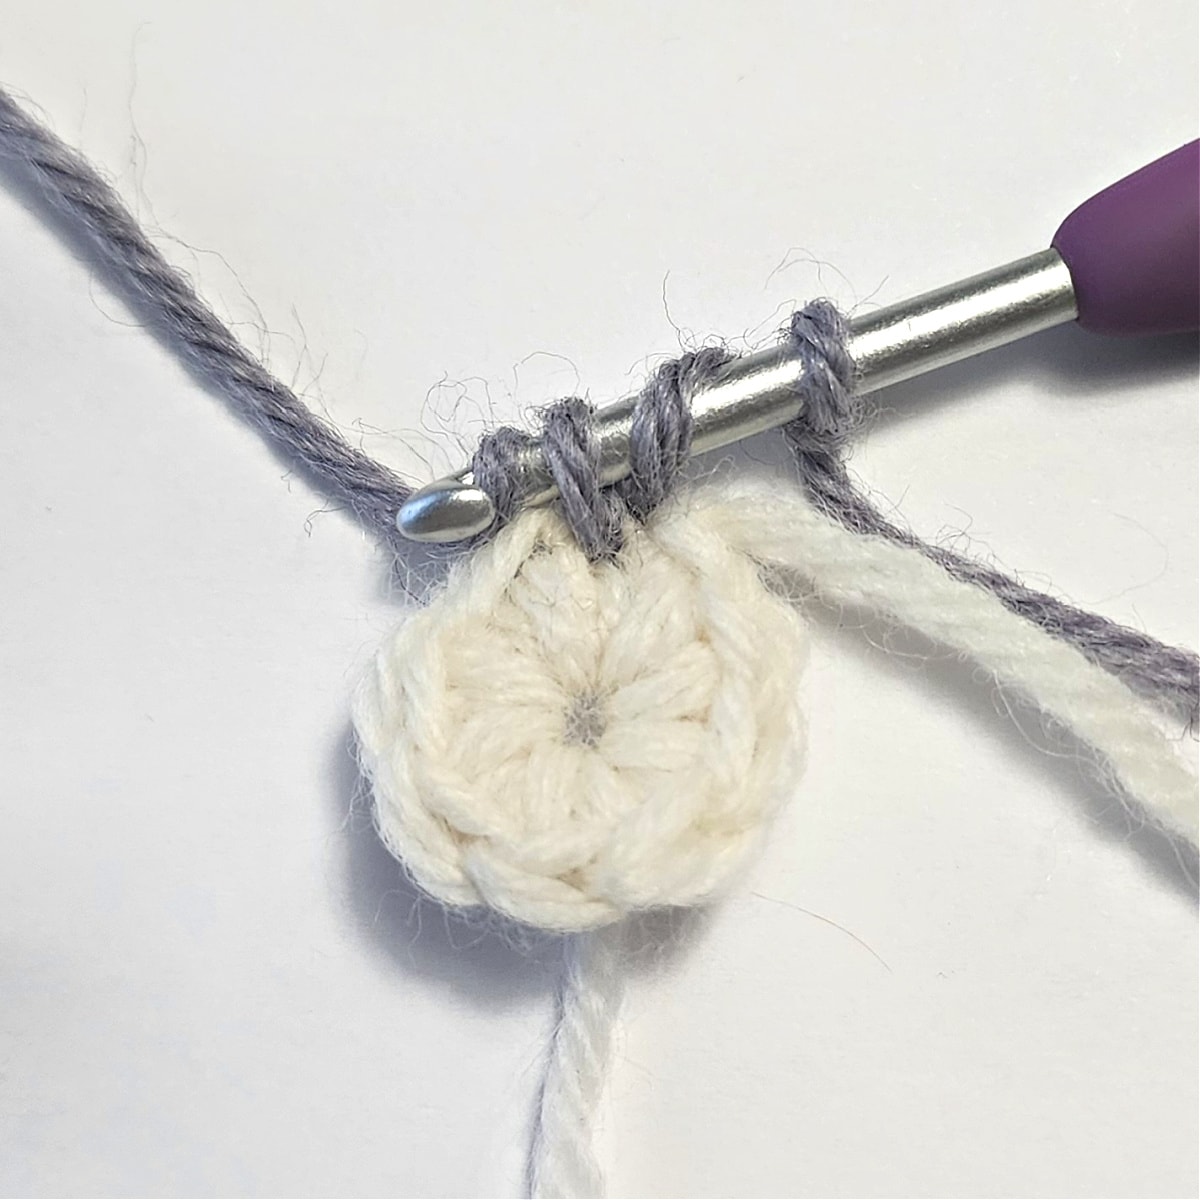 Join with a three double crochet cluster stitch.